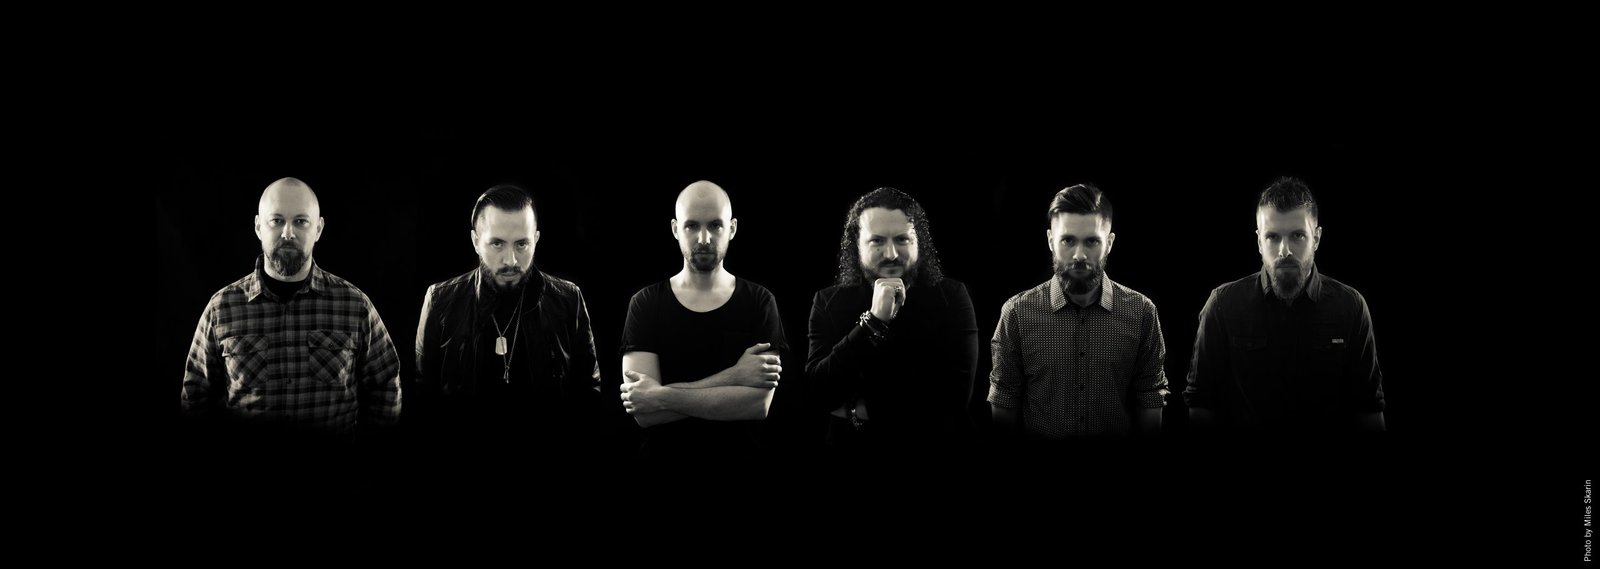 HAKEN Announce Upcoming Album “Virus” With an Infectious New Single!